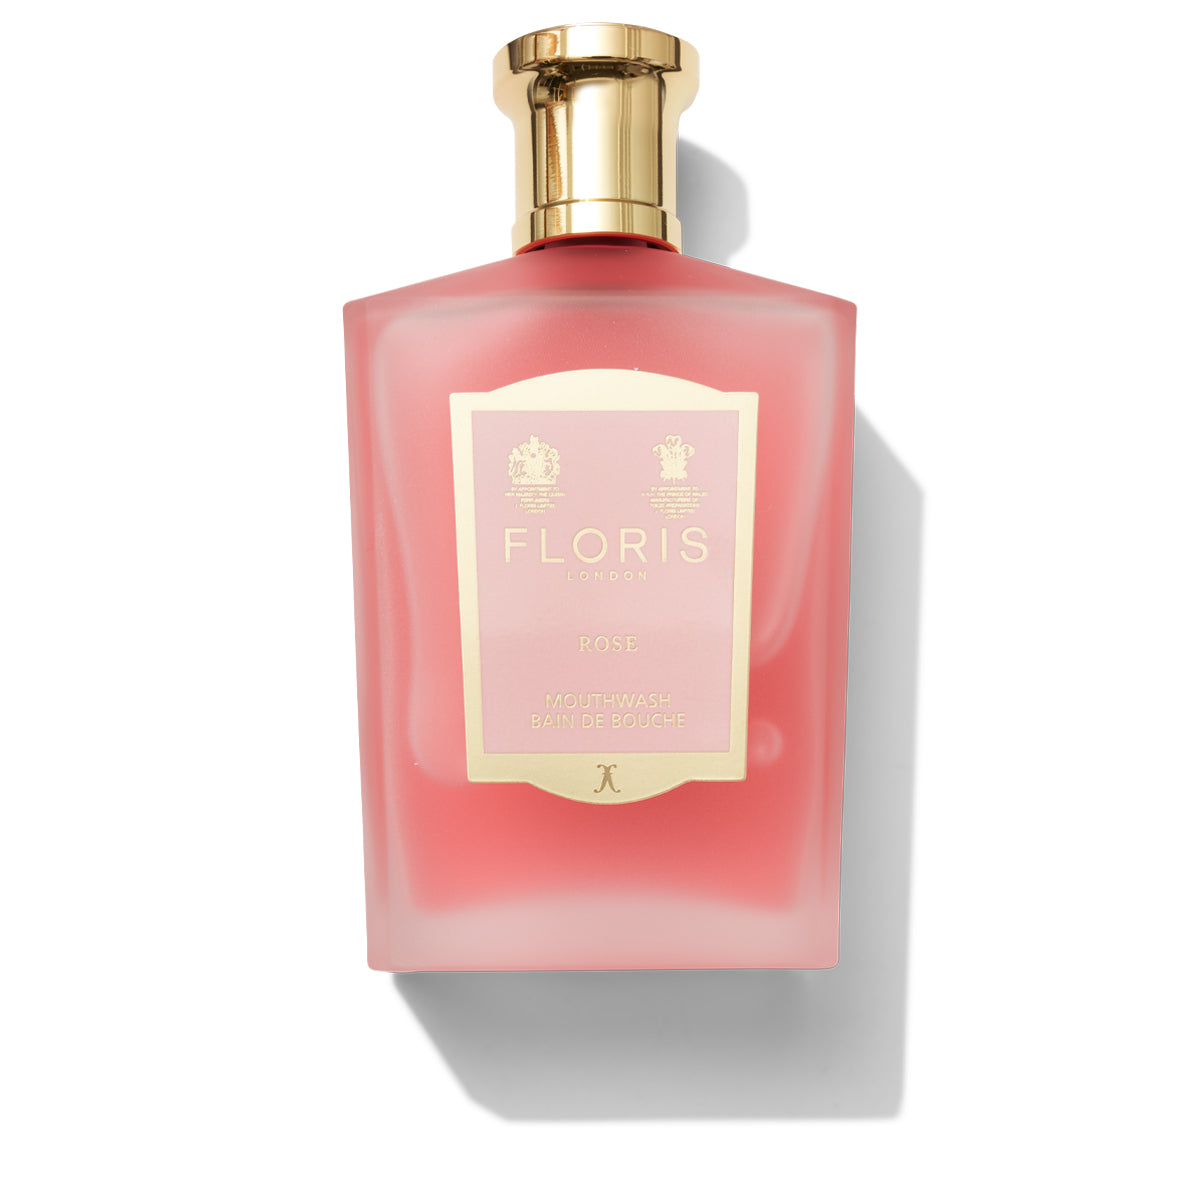 Floris london gold topped bottle with a pink liquid and pink label showing rose mouthwash